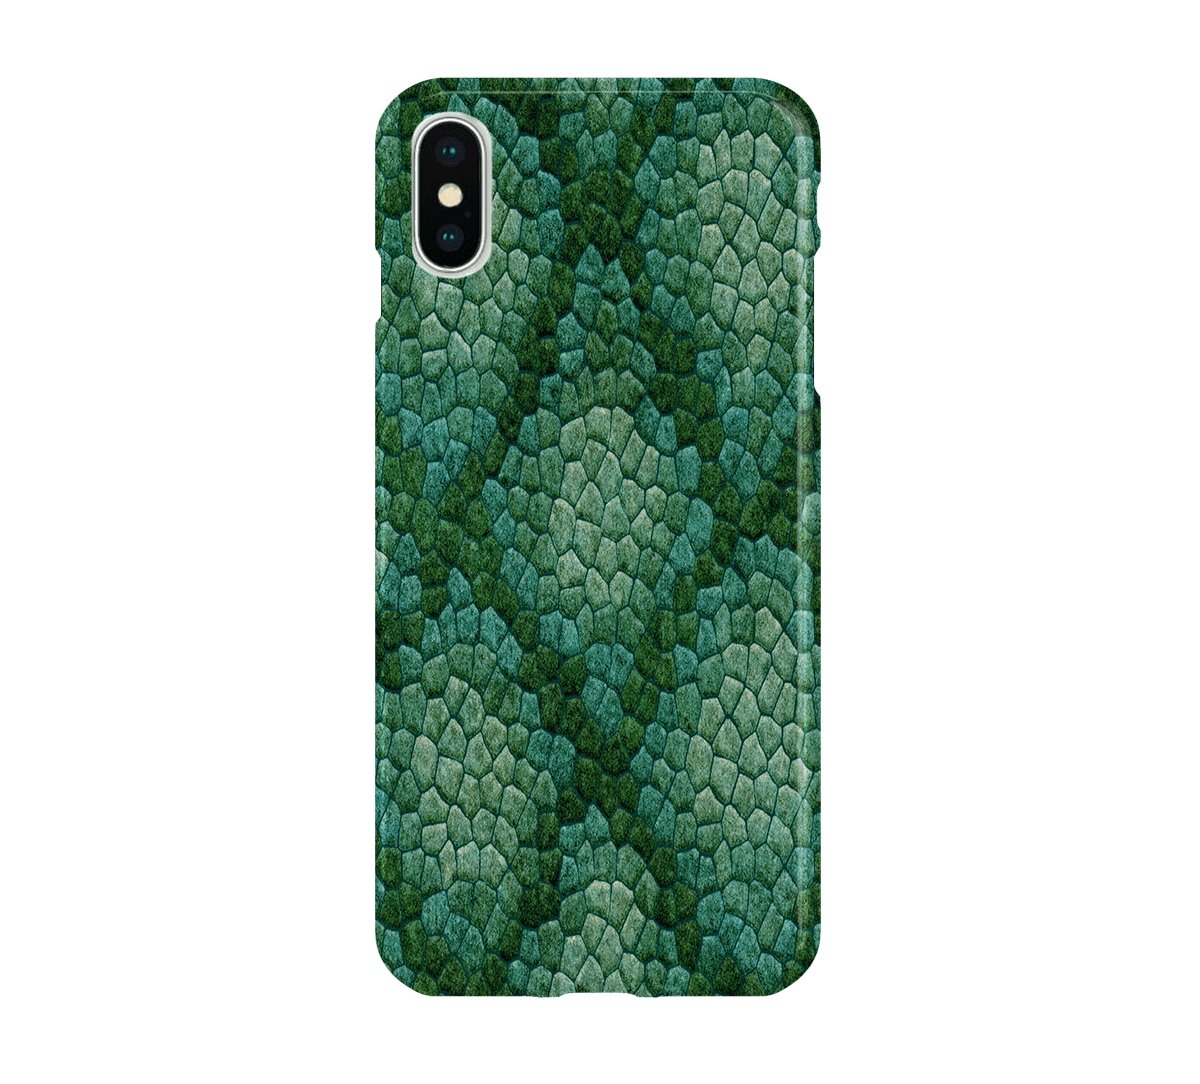 Snakeskin II - iPhone phone case designs by CaseSwagger